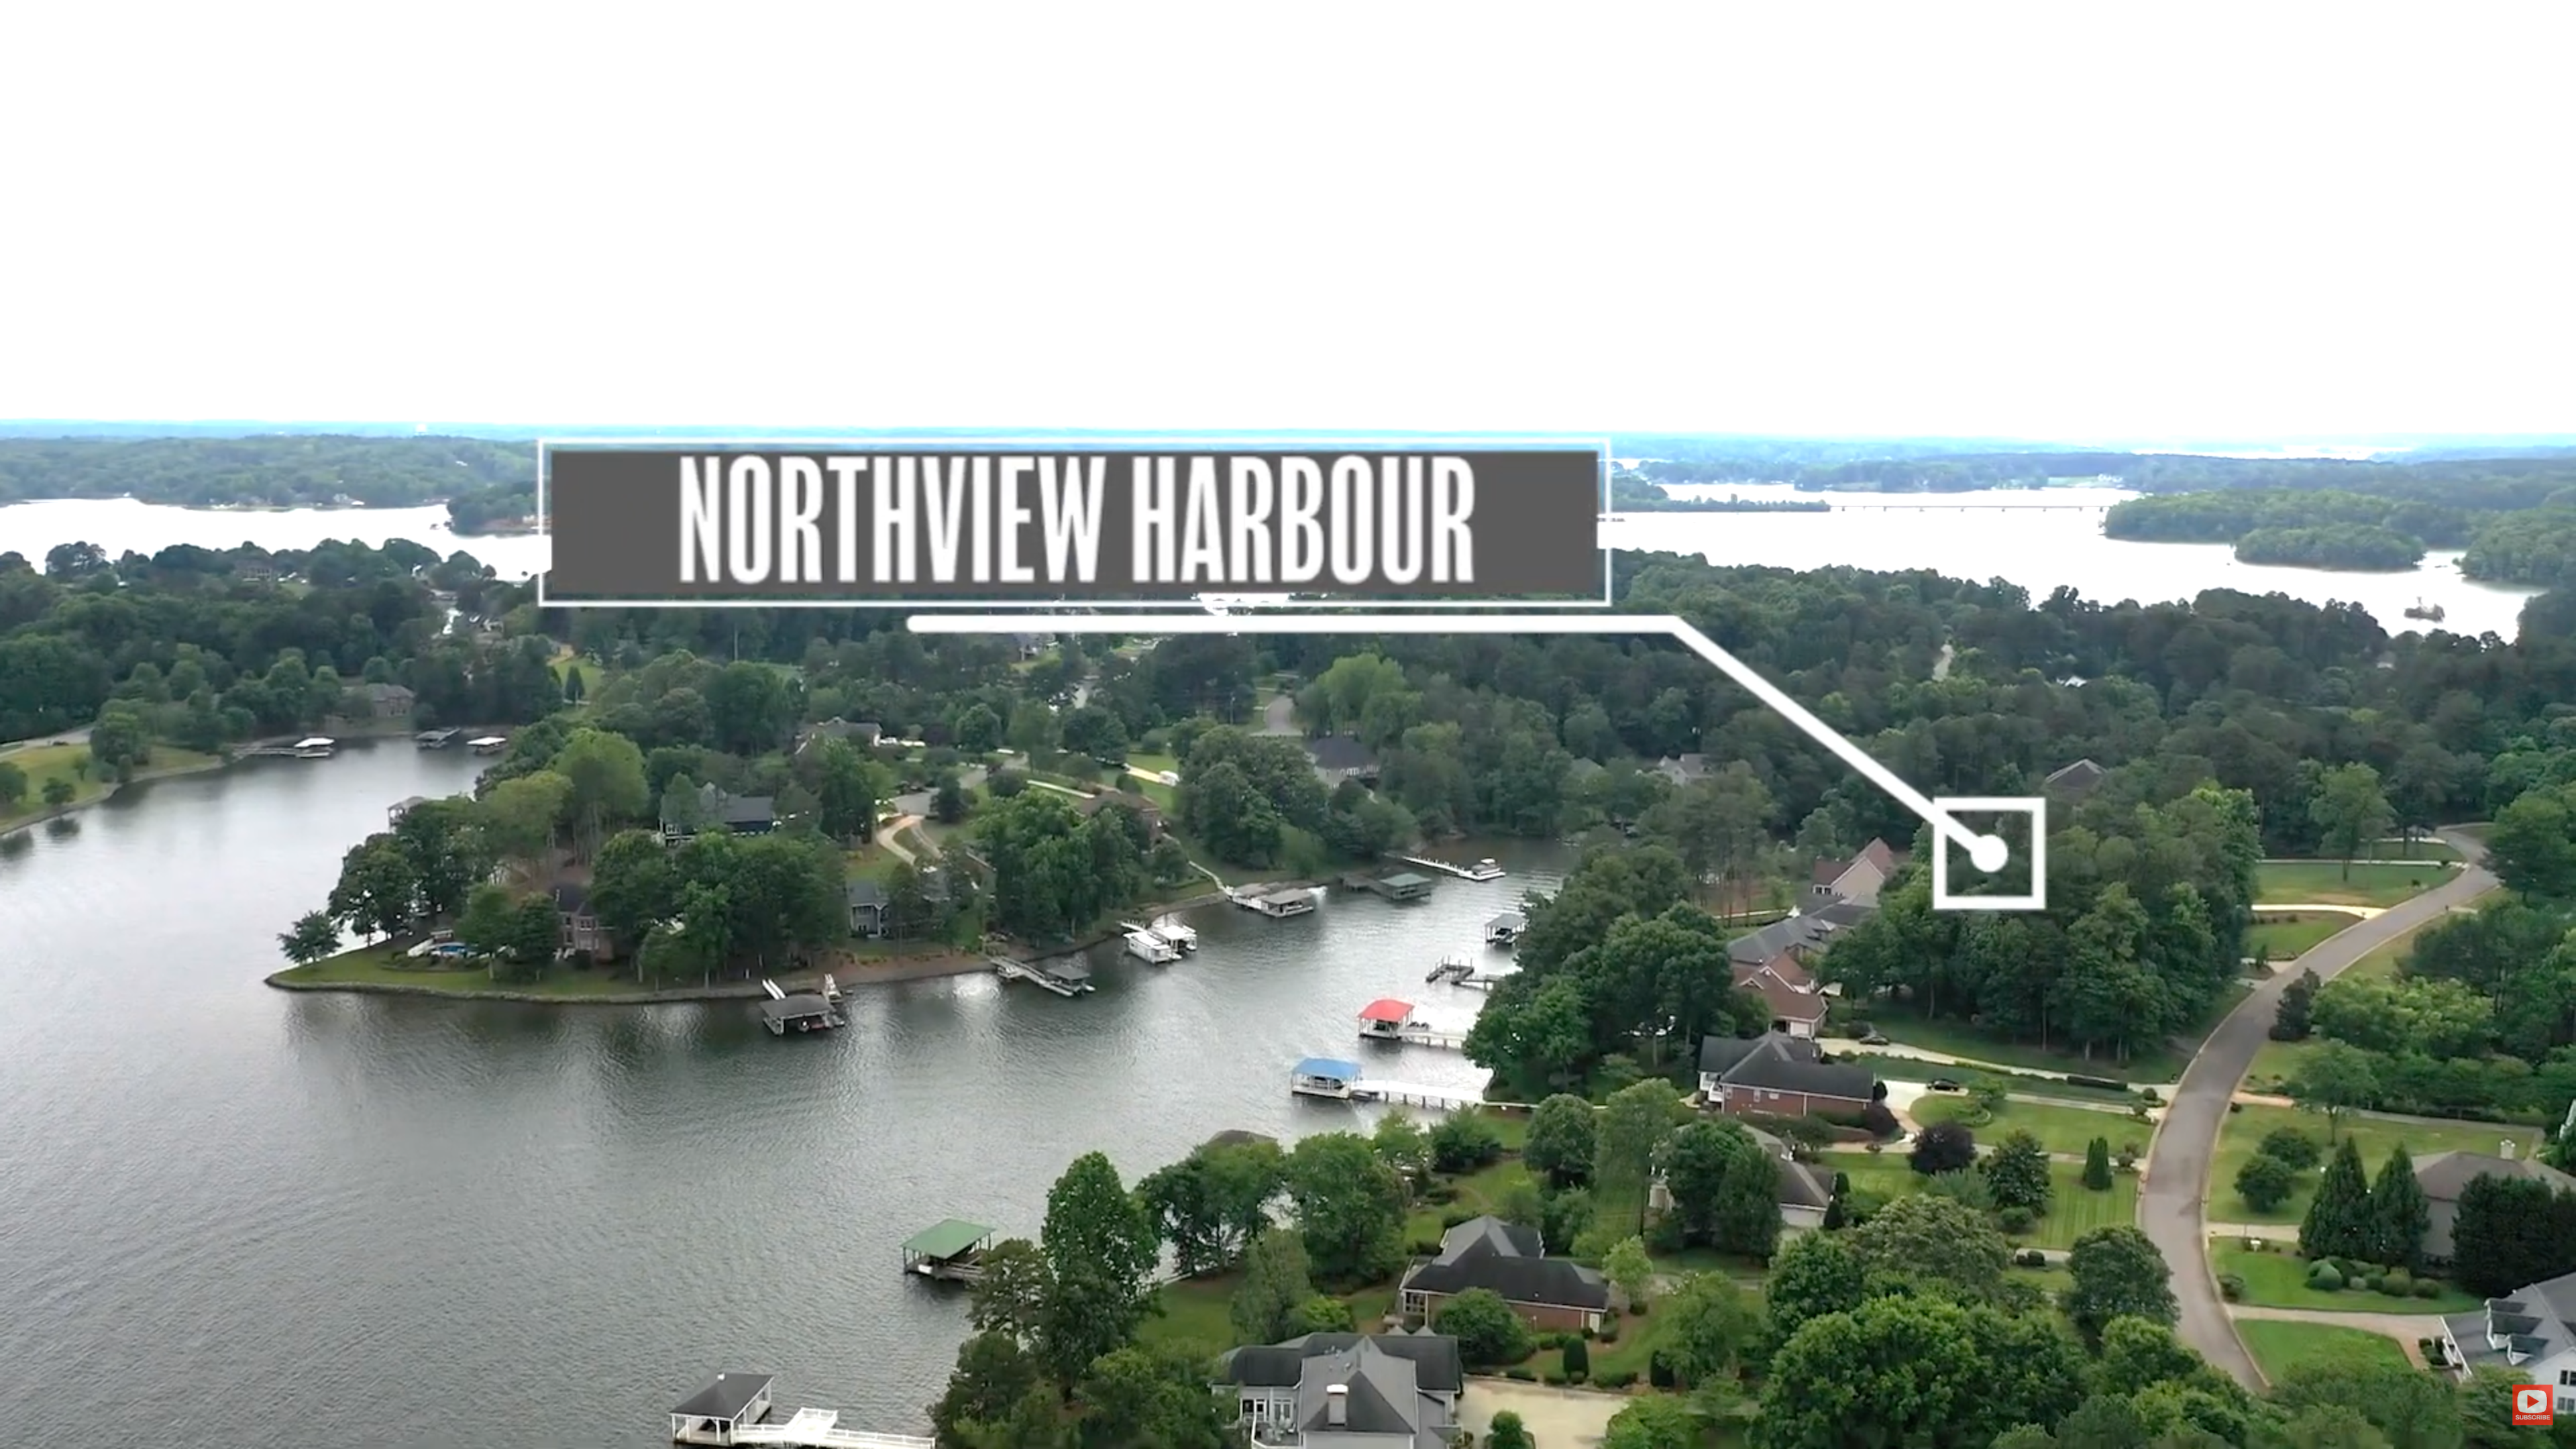 Northview Harbour on Lake Norman in Sherrill's Ford, North Carolina